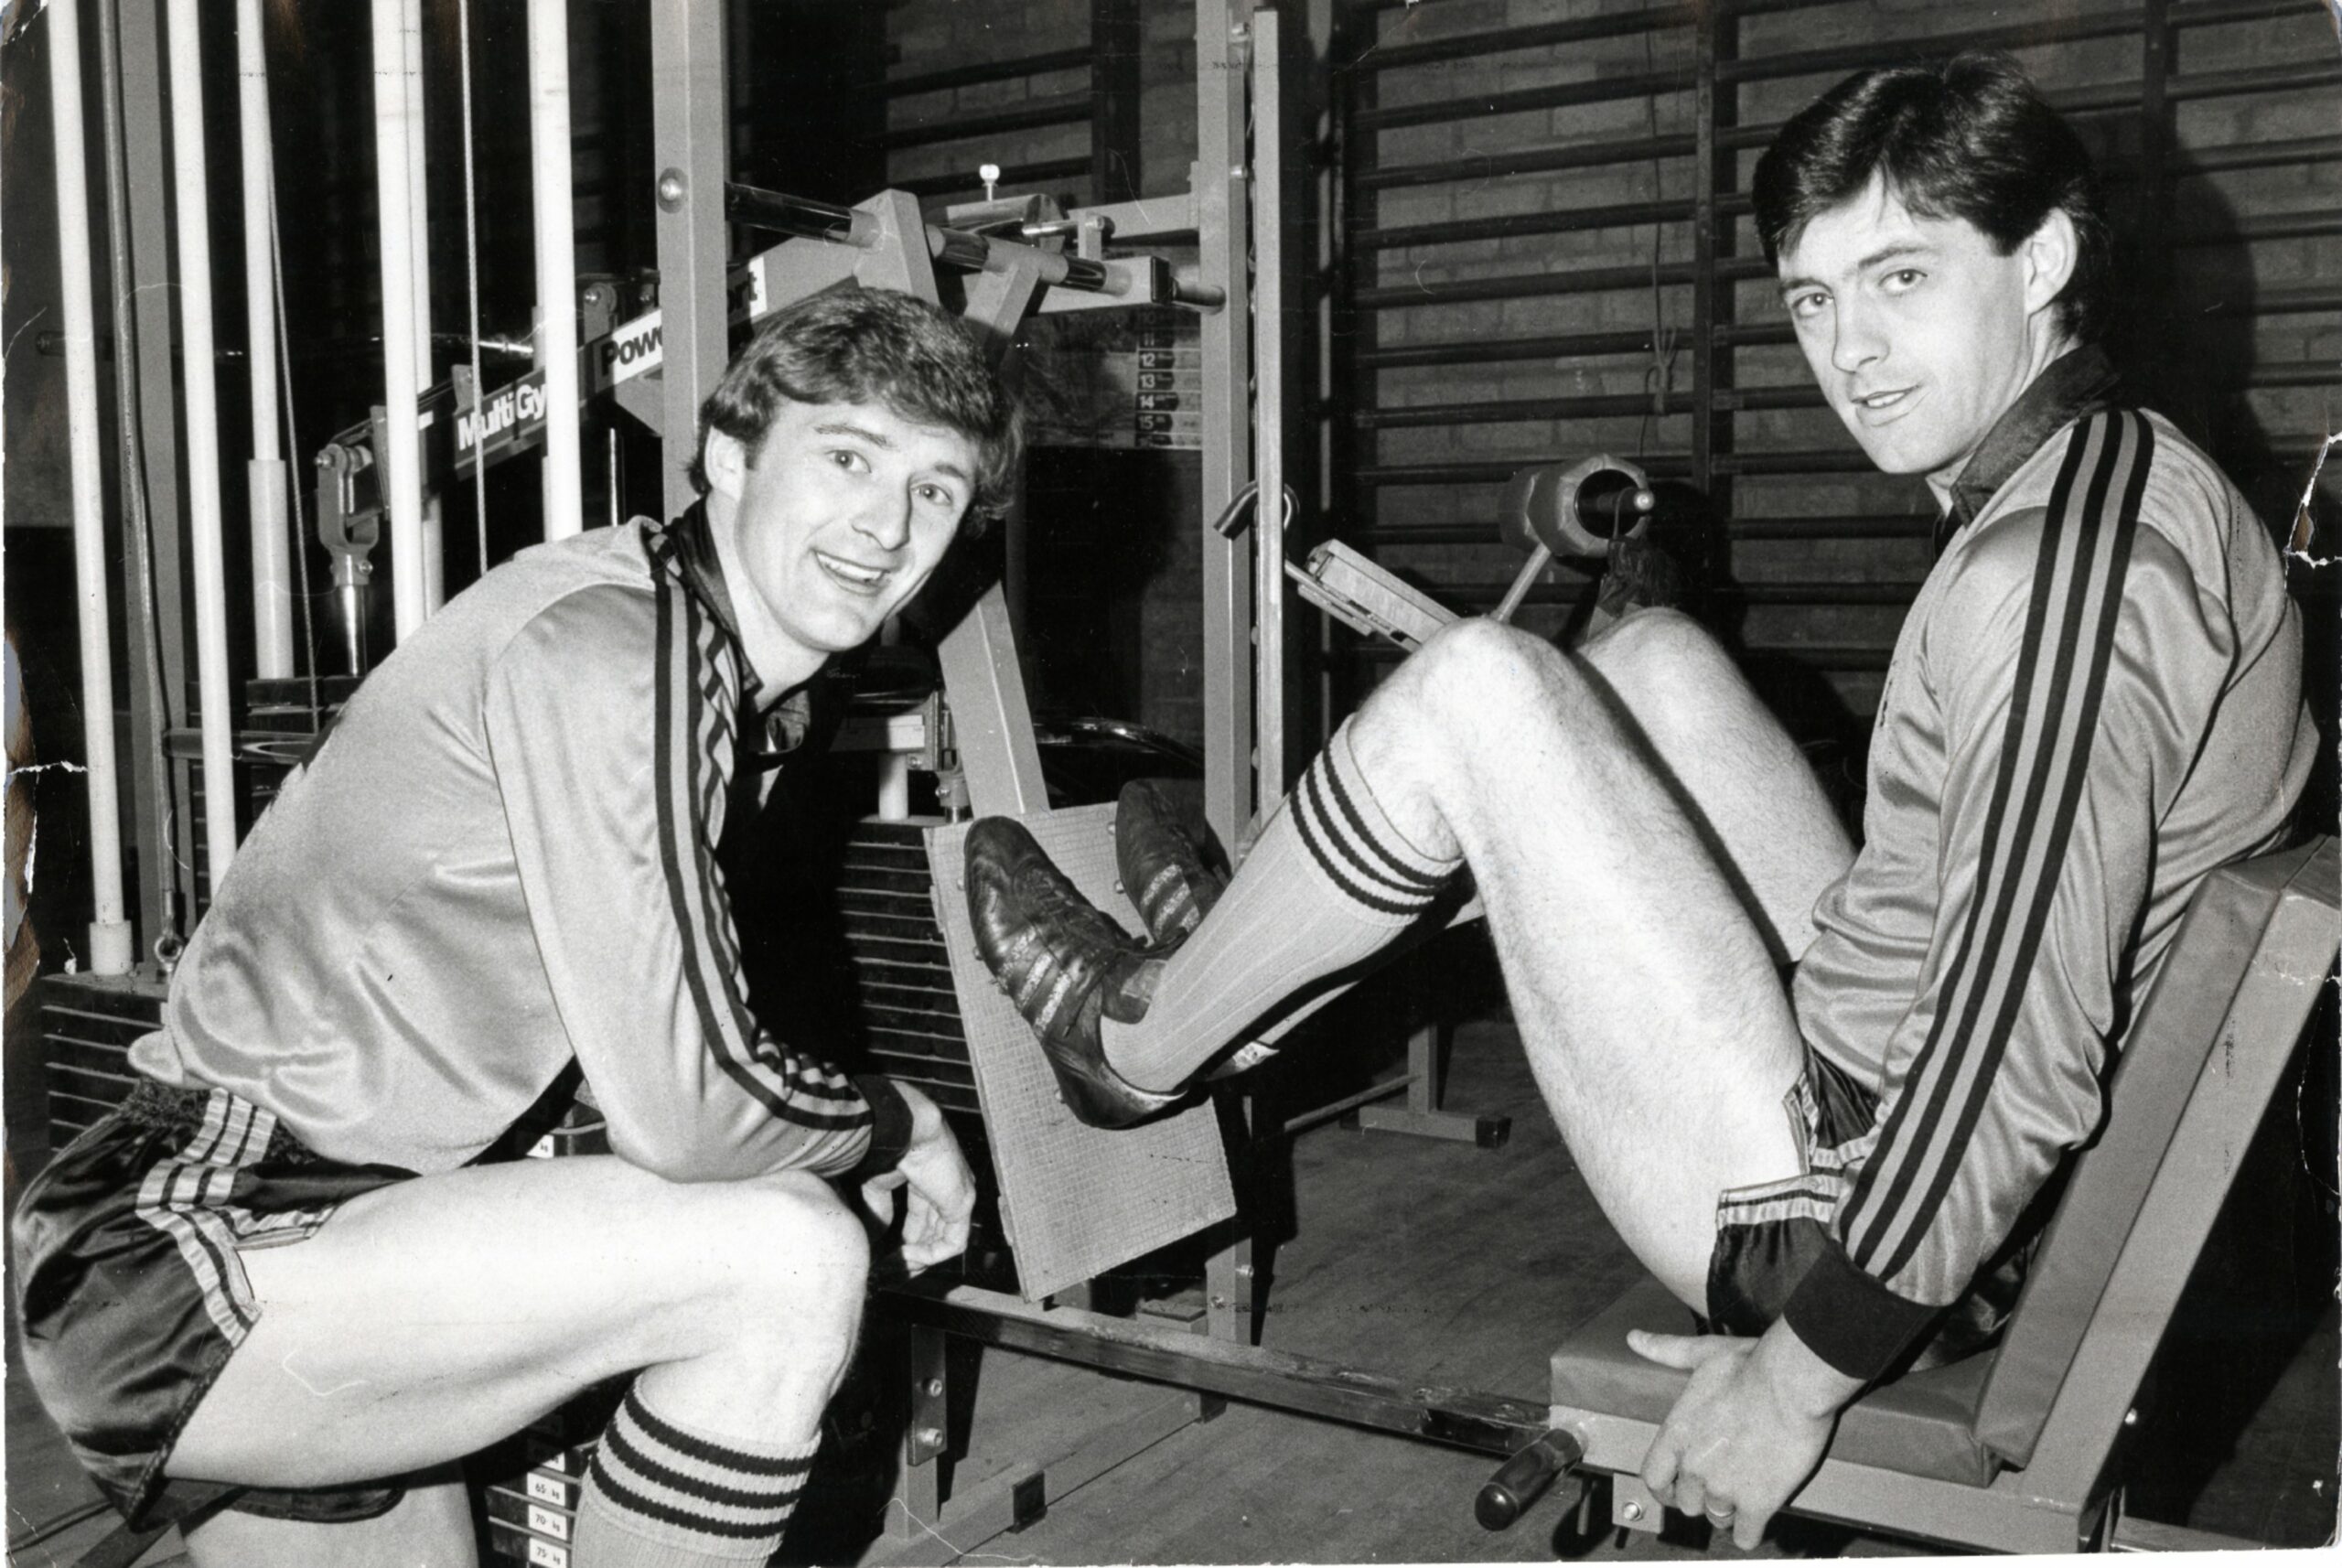 Paul Hegarty and David Narey are pictured after being called up for Scotland duty together in 1983.